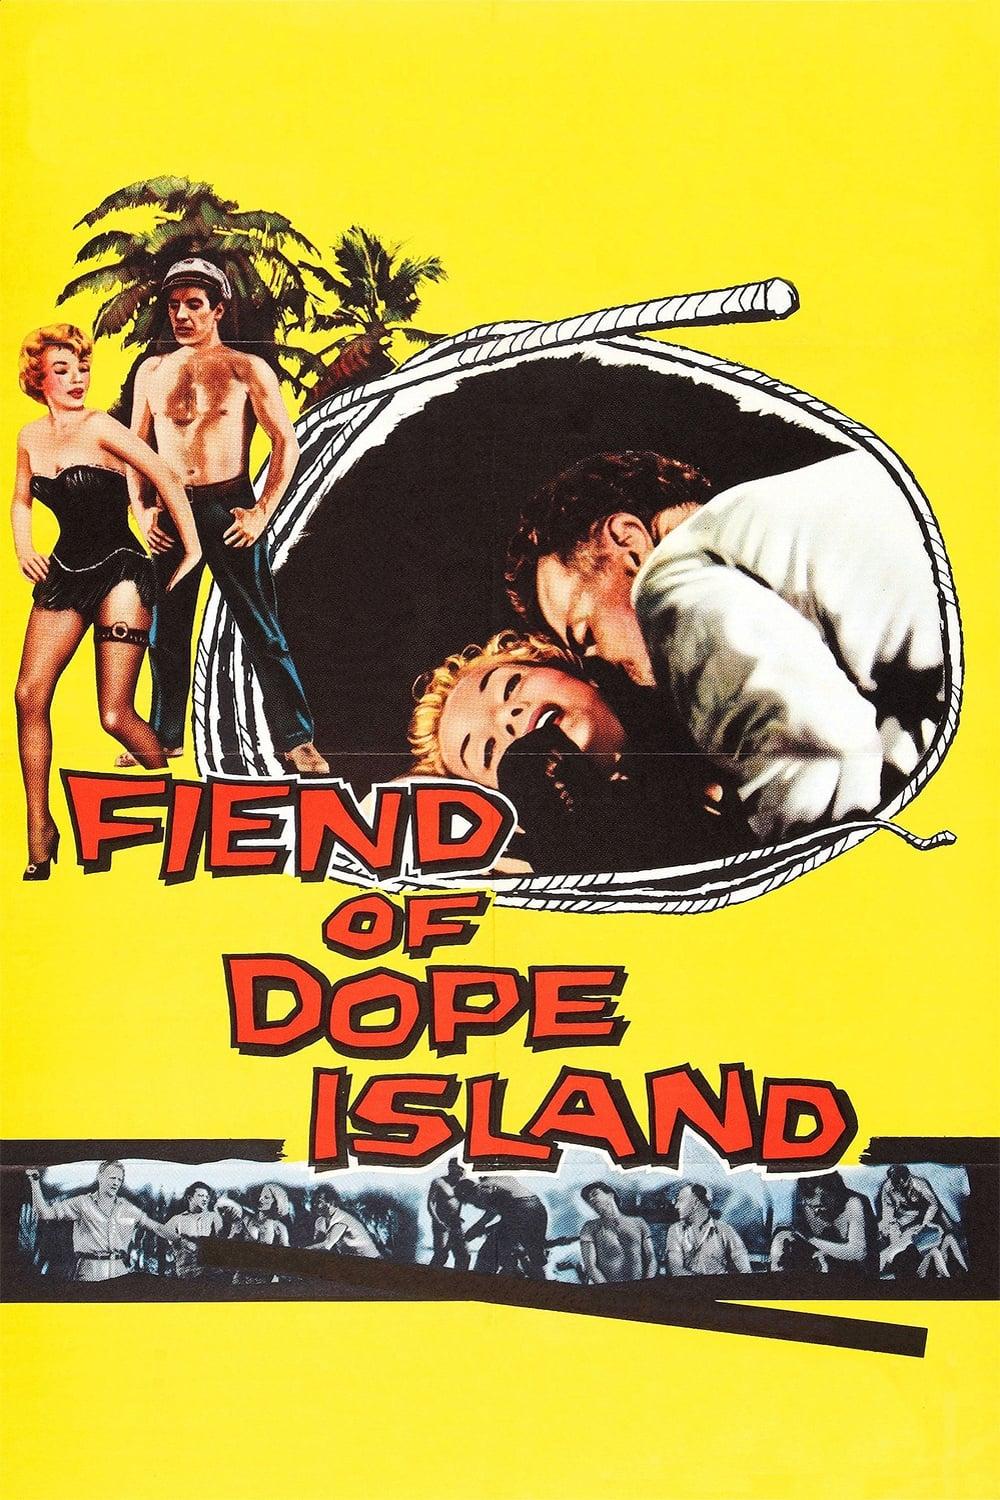 Fiend of Dope Island poster